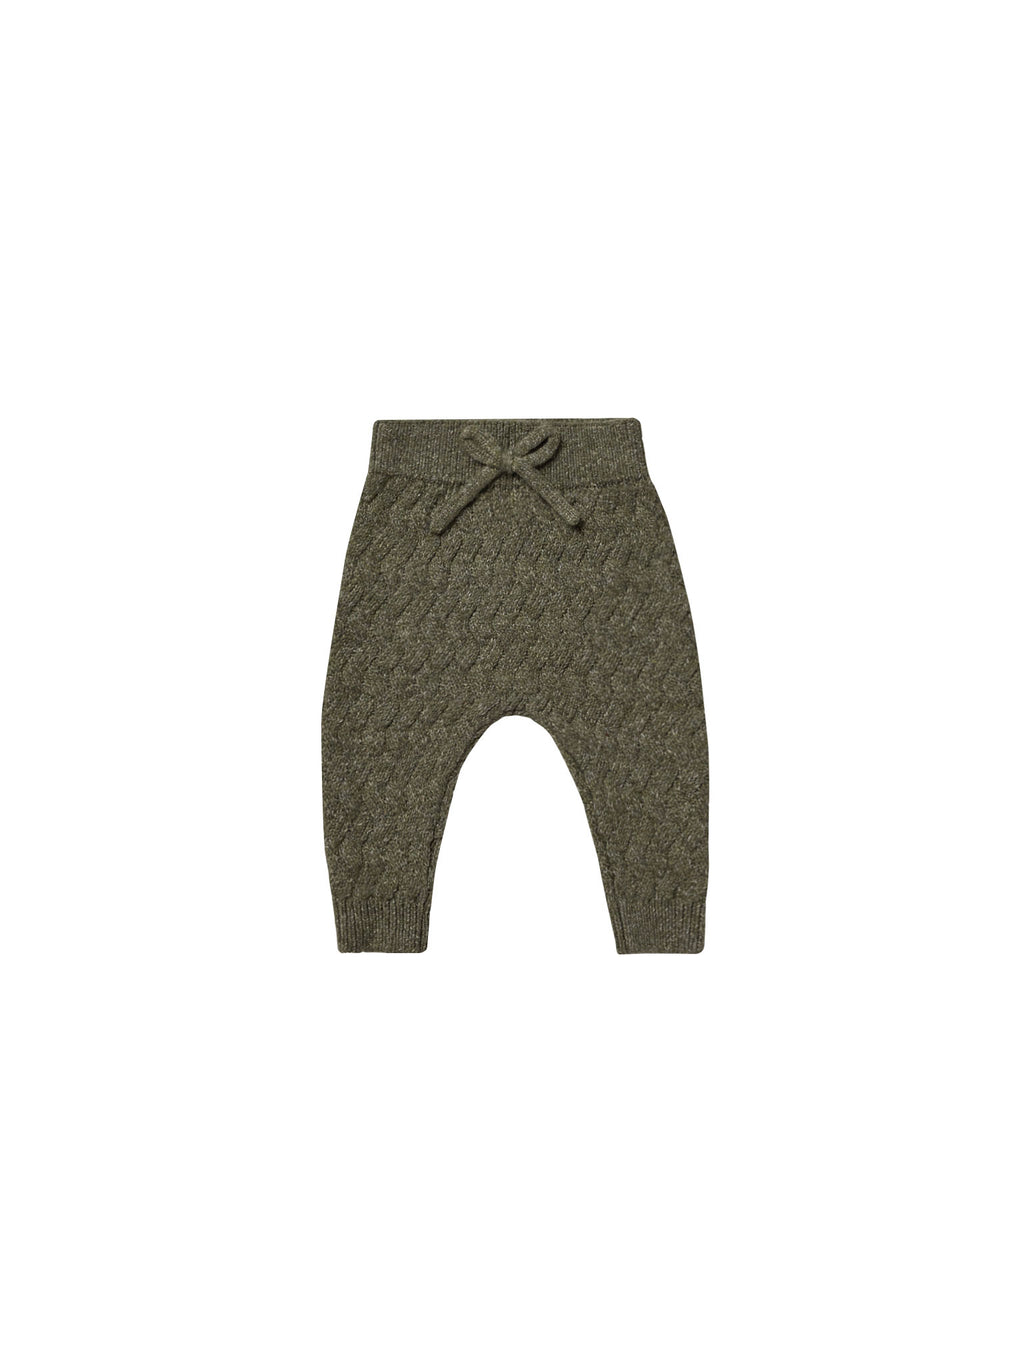 Quincy Mae Knit Pant - Forest